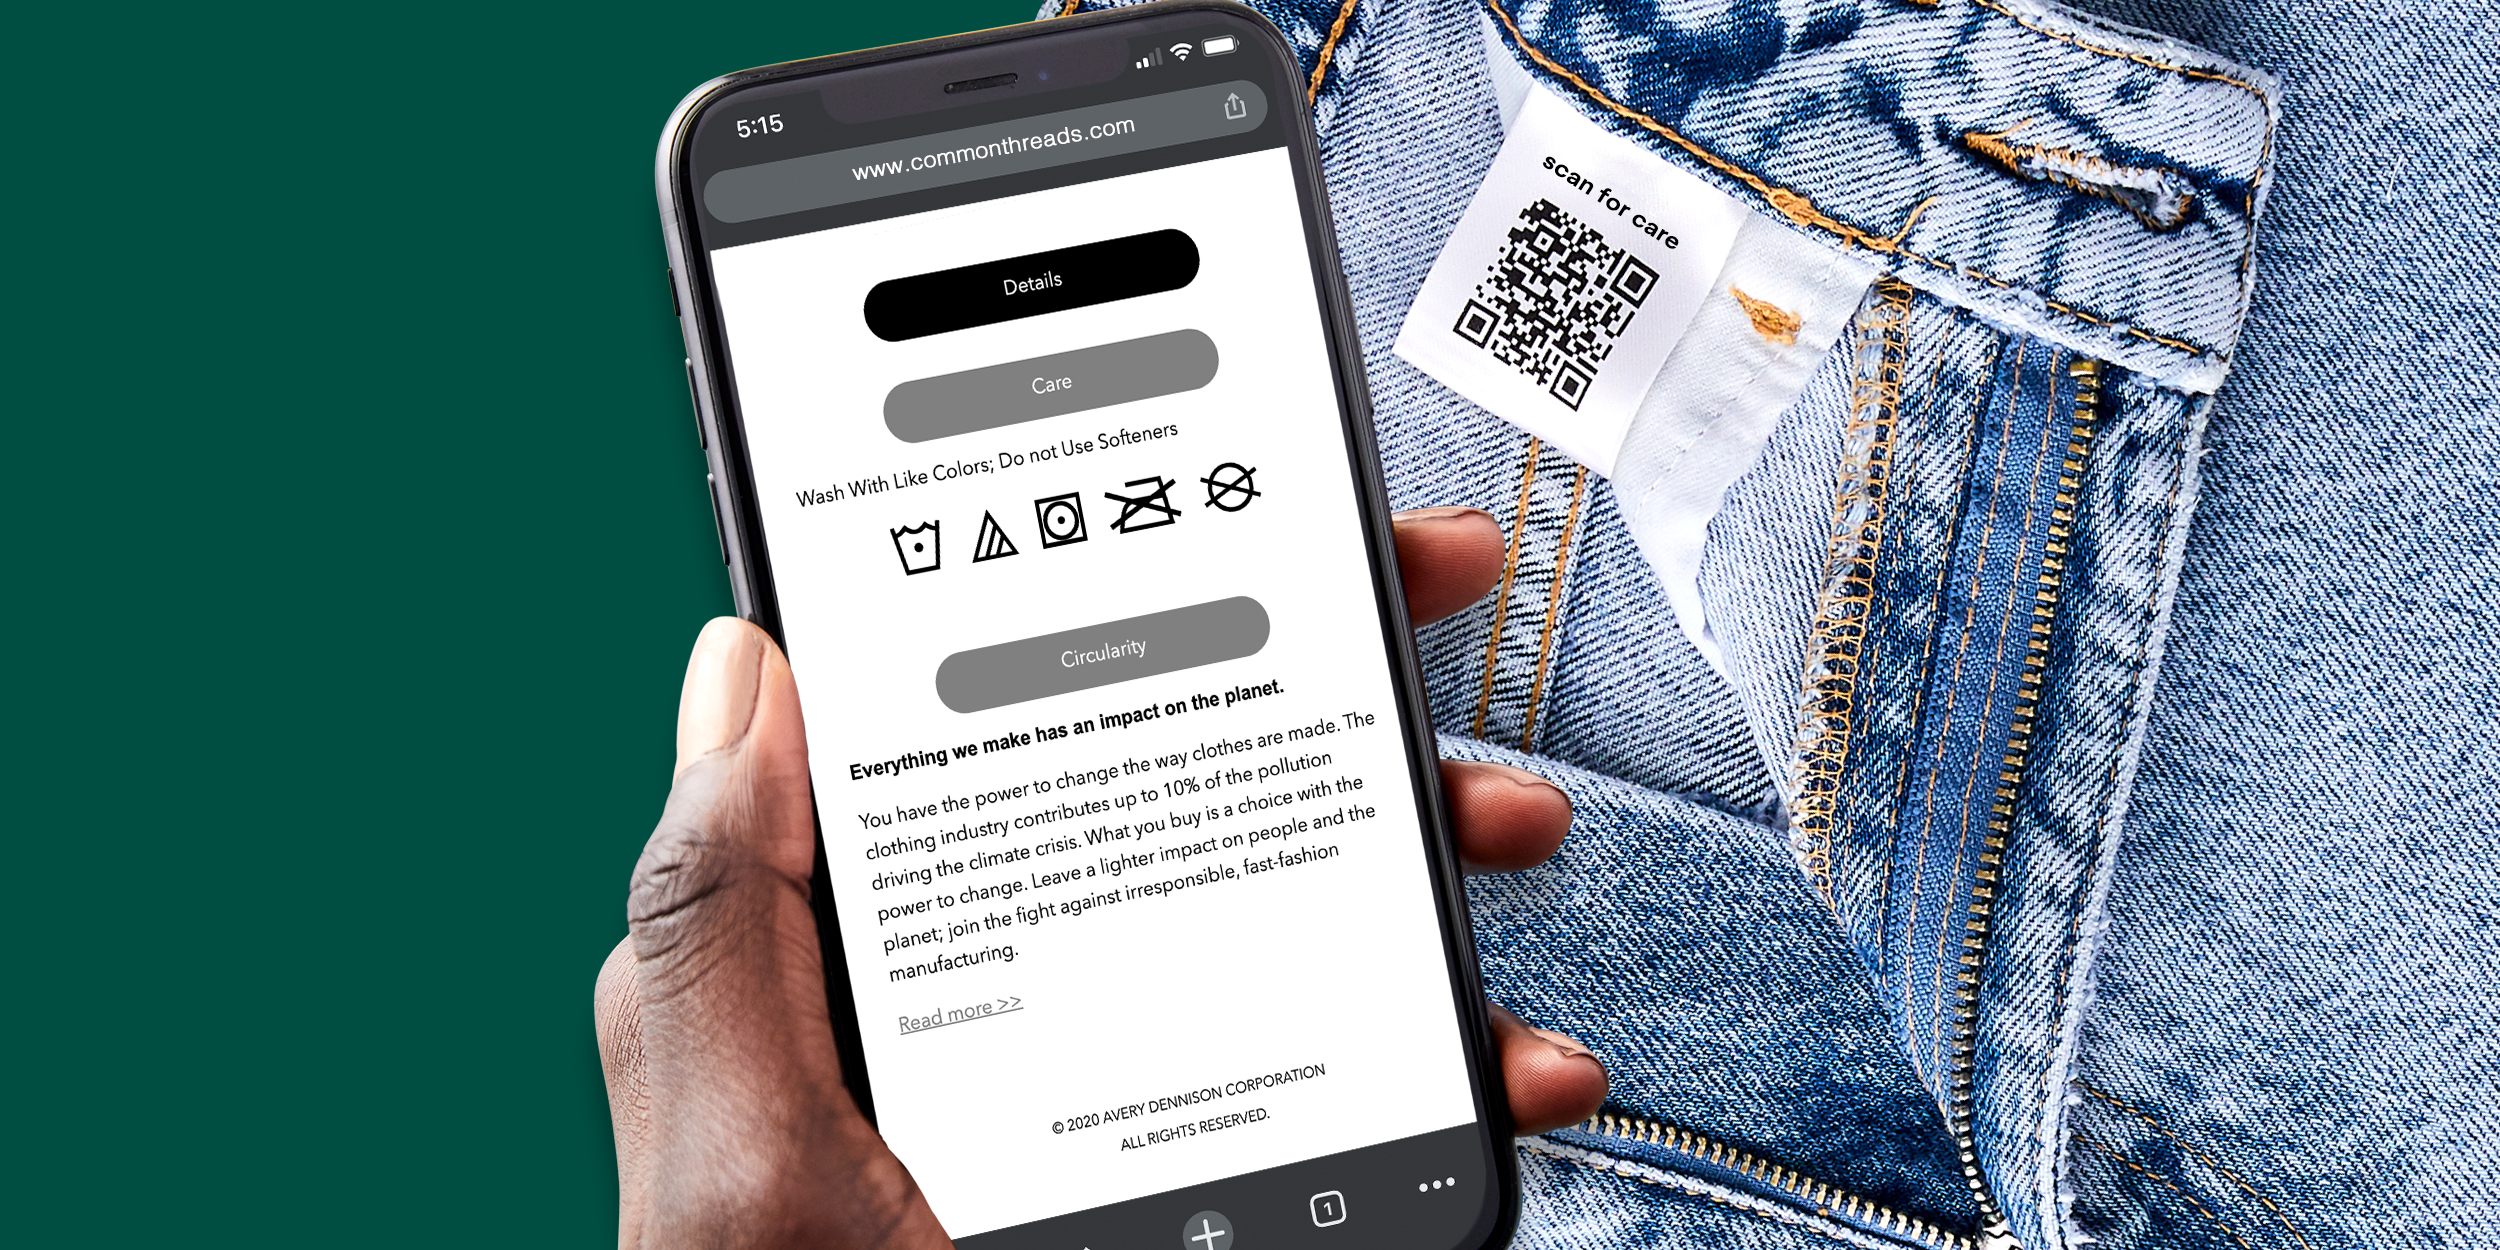 Avery Dennison Launches Digital Care Label in partnership with Ambercycle 